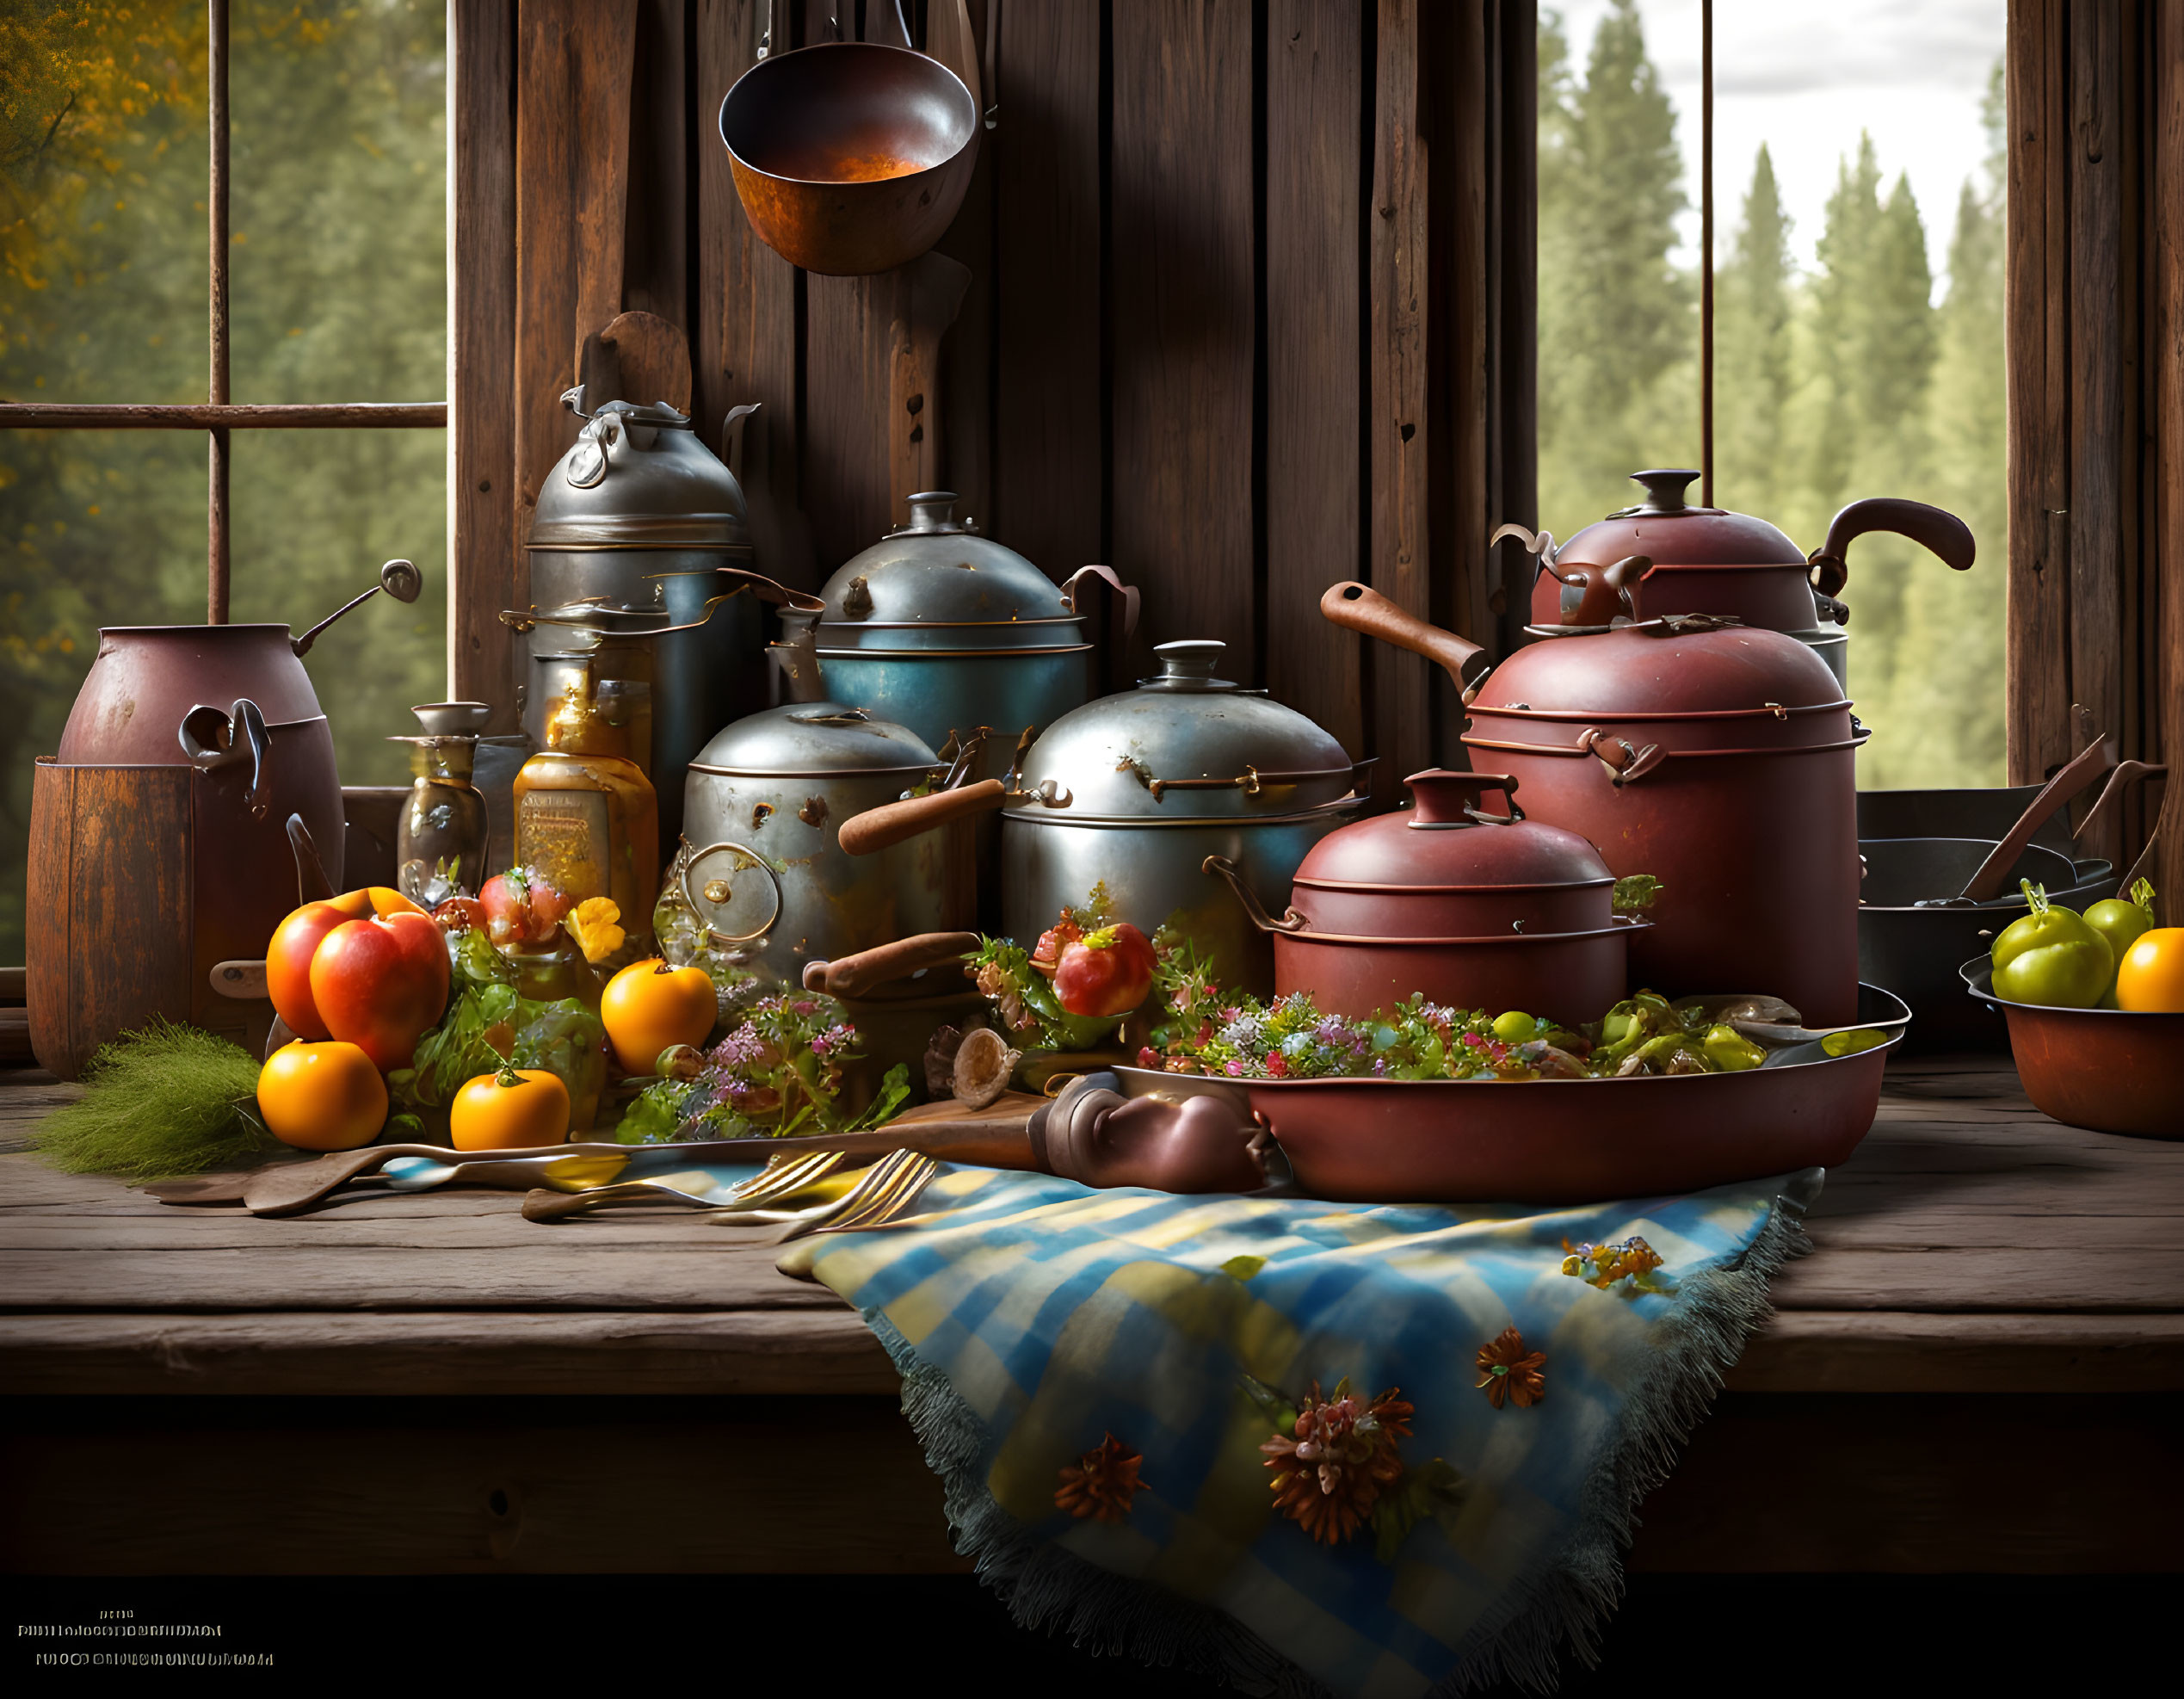 Vintage Cookware and Fresh Vegetables in Rustic Kitchen Setting